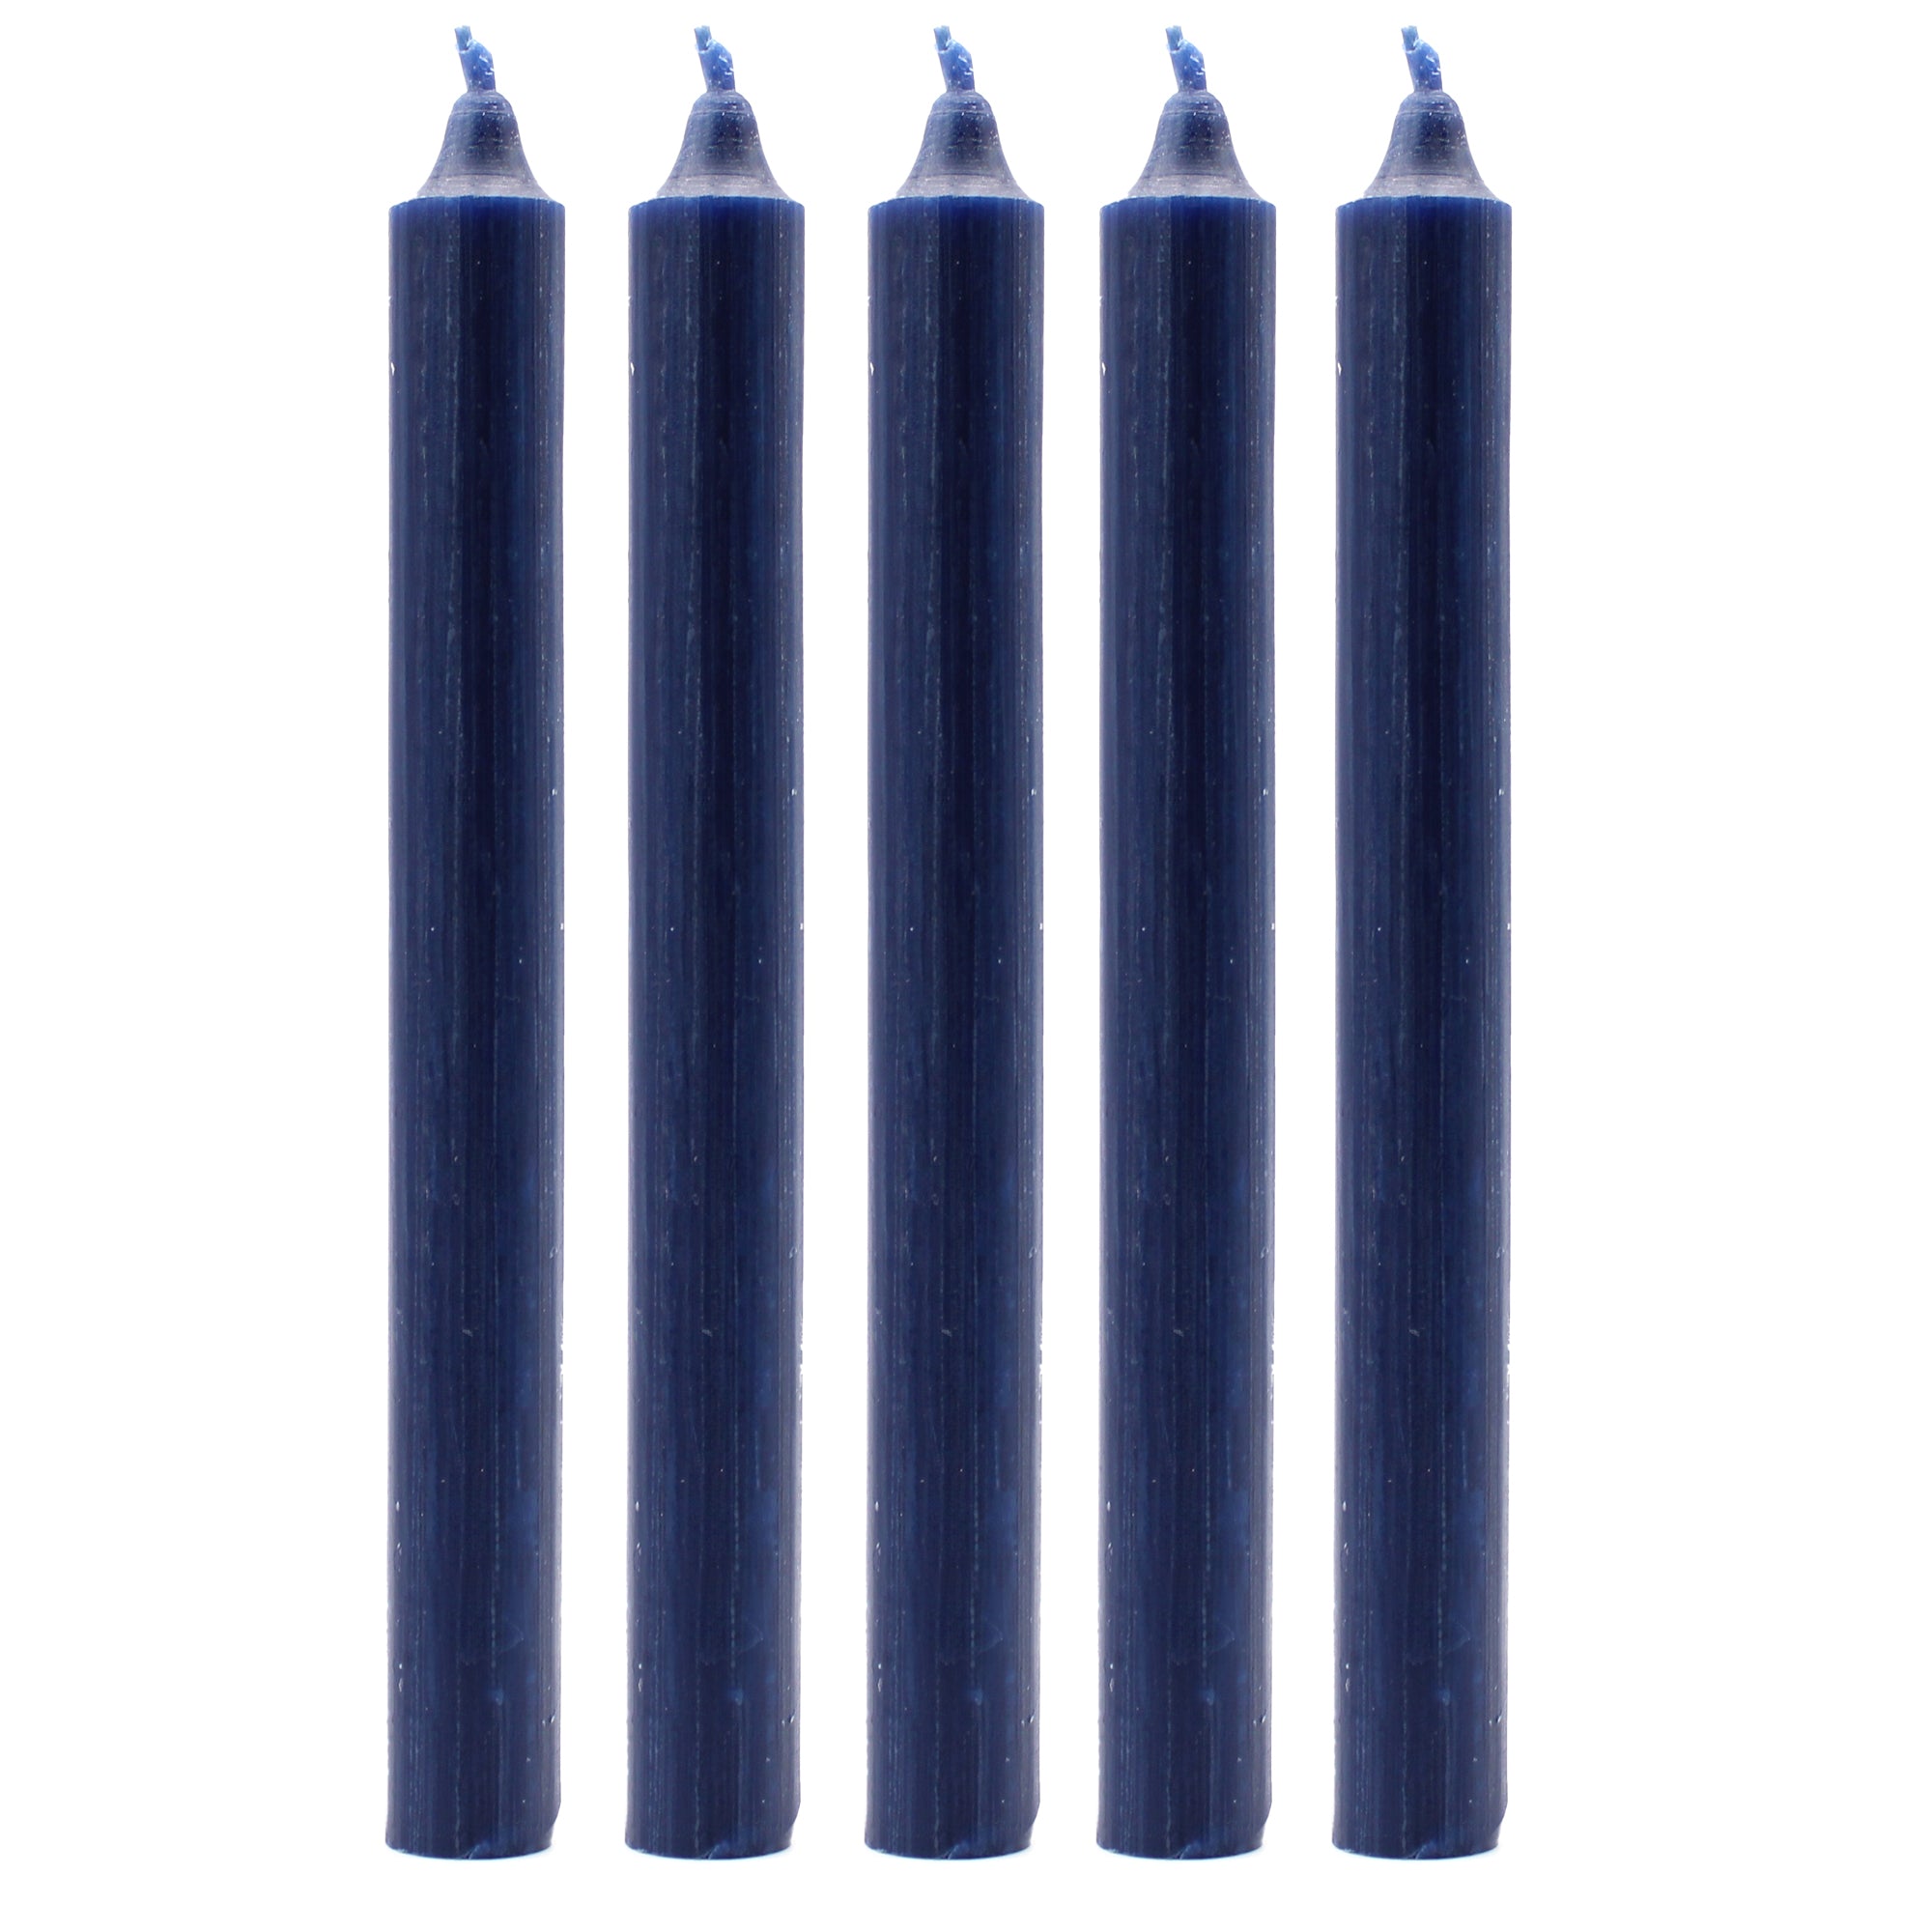 View Solid Colour Dinner Candles Rustic Navy Pack of 5 information